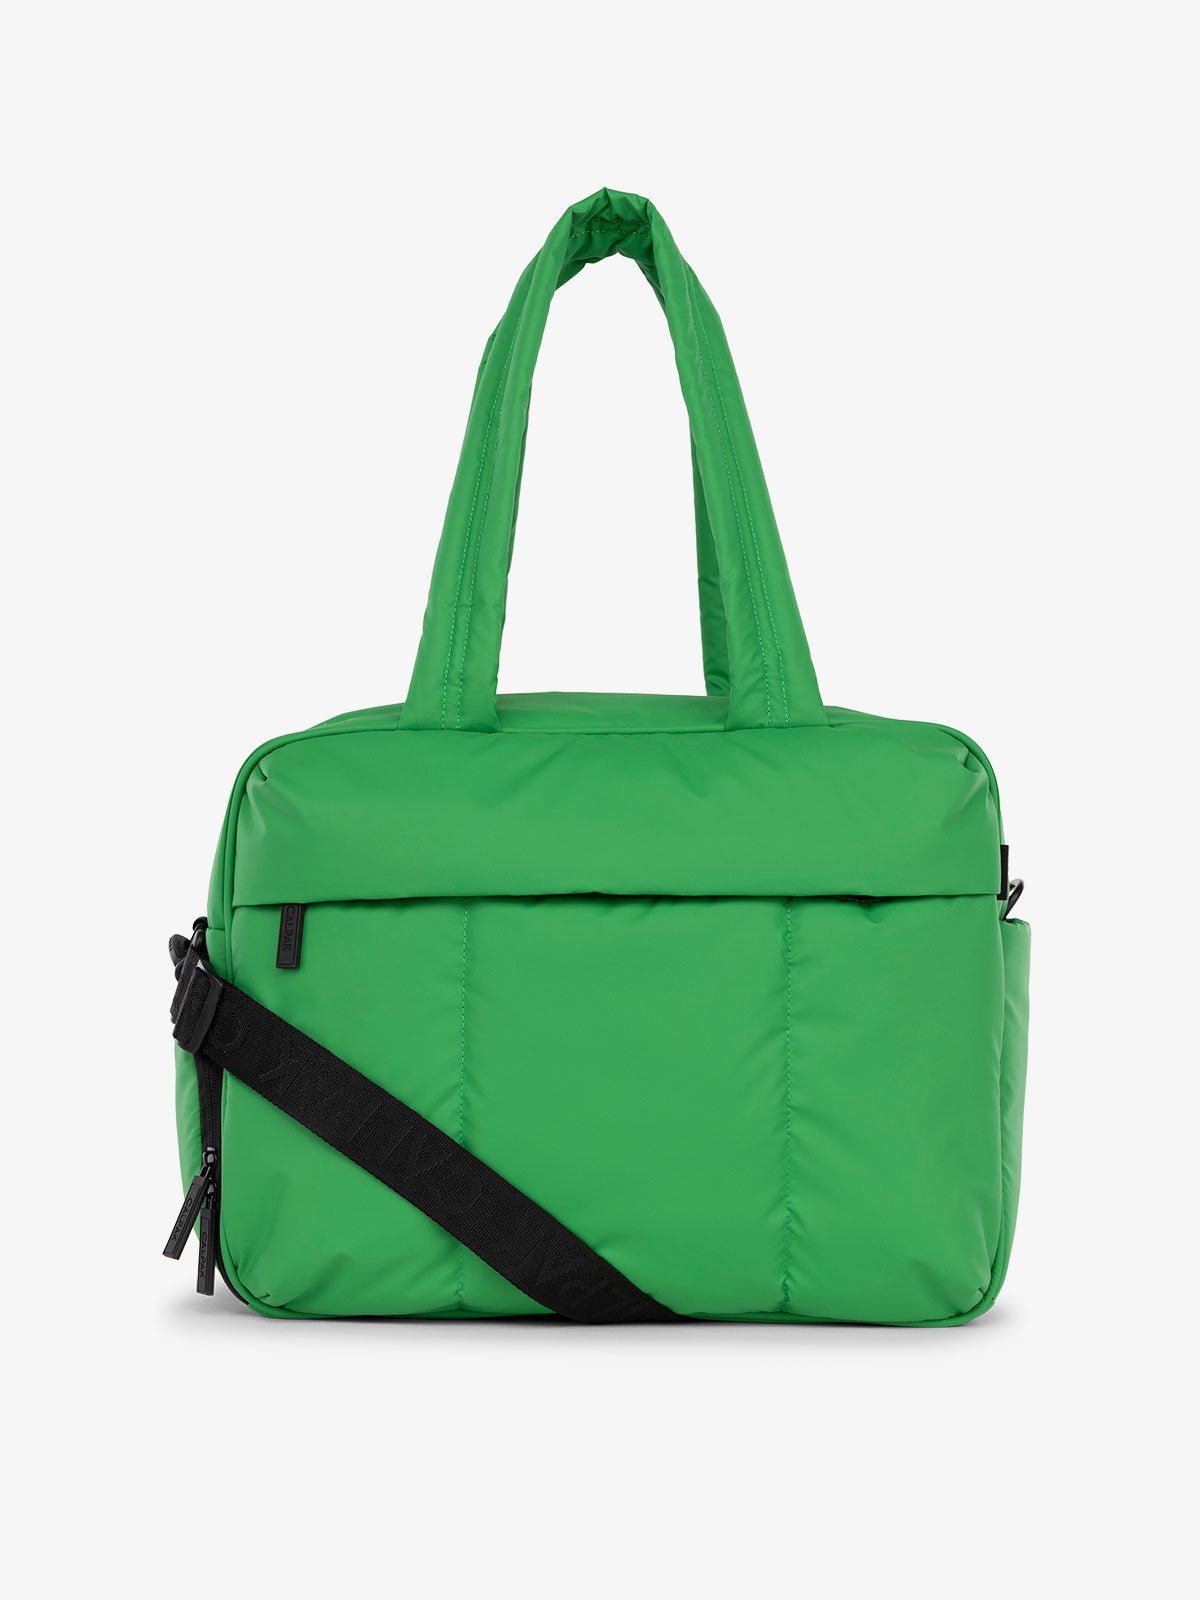 CALPAK Luka Duffel puffy Bag with detachable strap and zippered front pocket in green apple